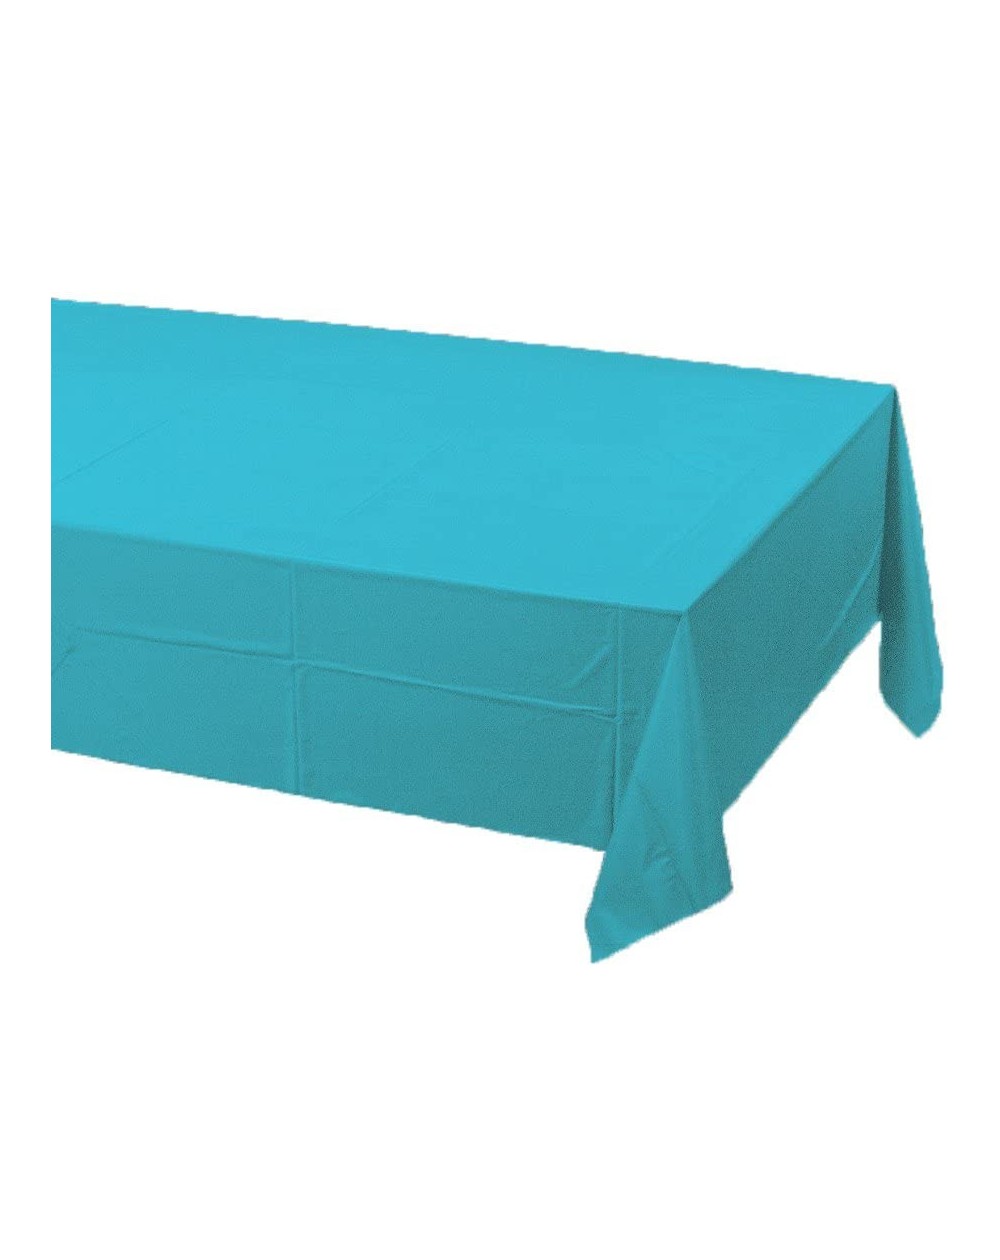 Tablecovers Paper Banquet Table Cover- Bermuda Blue - CM119A3FUOP $10.37